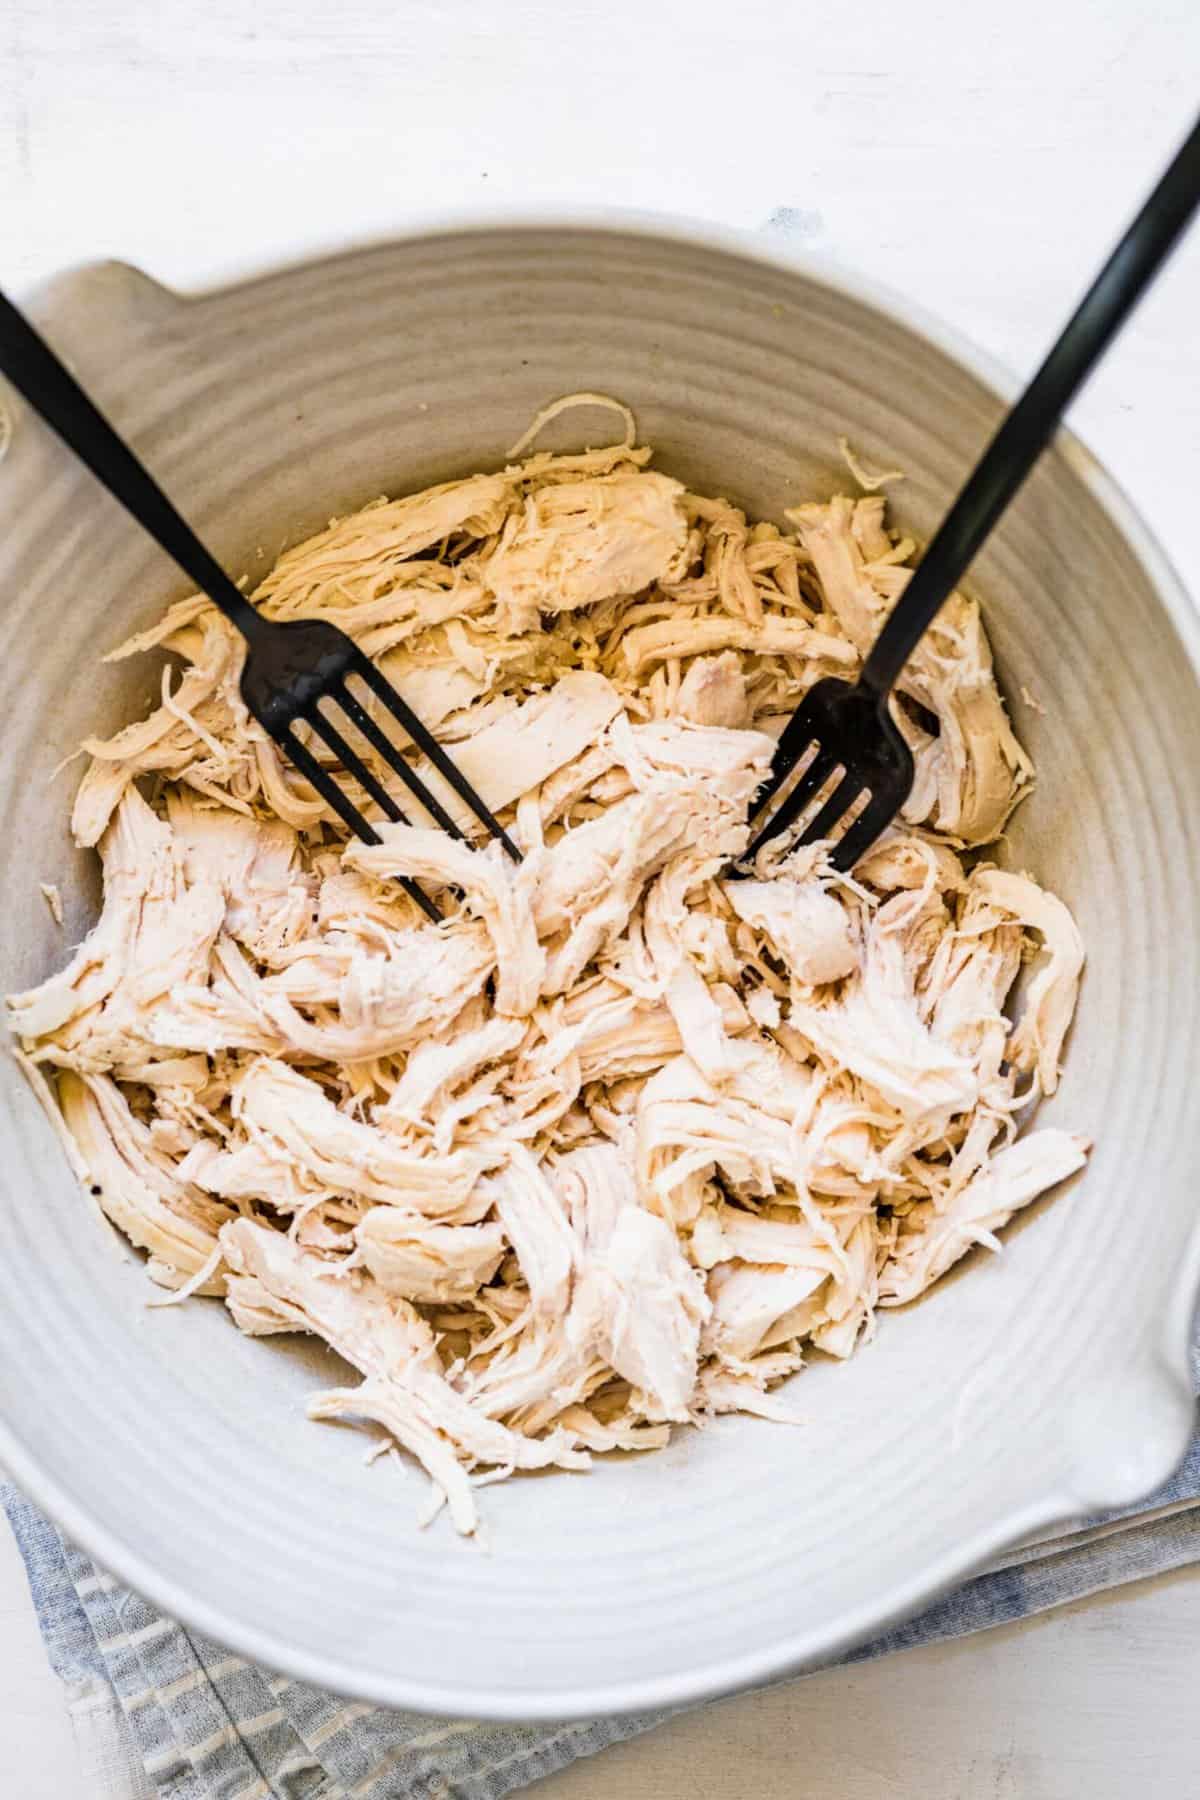 two black forks in a large bowl of shredded chicken